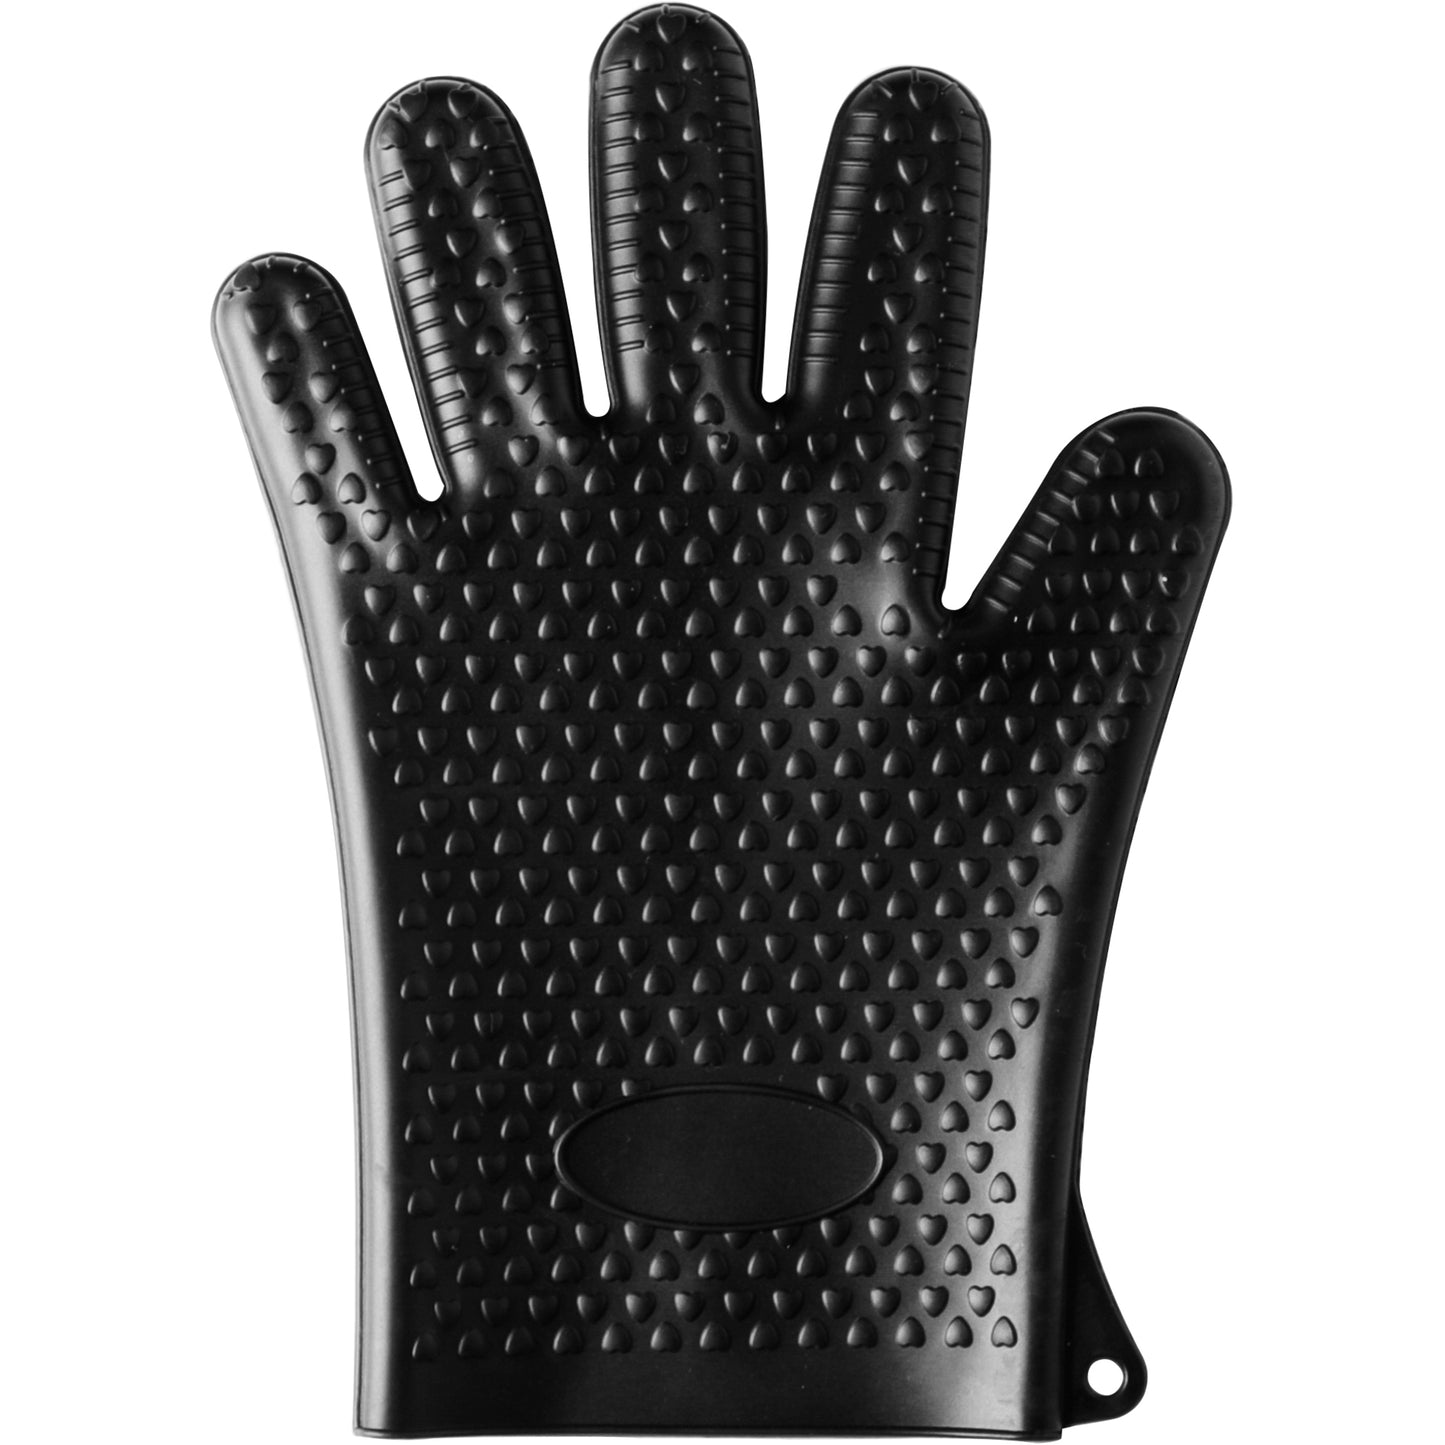 North Point® heat-resistant silicone mitt in a black color.